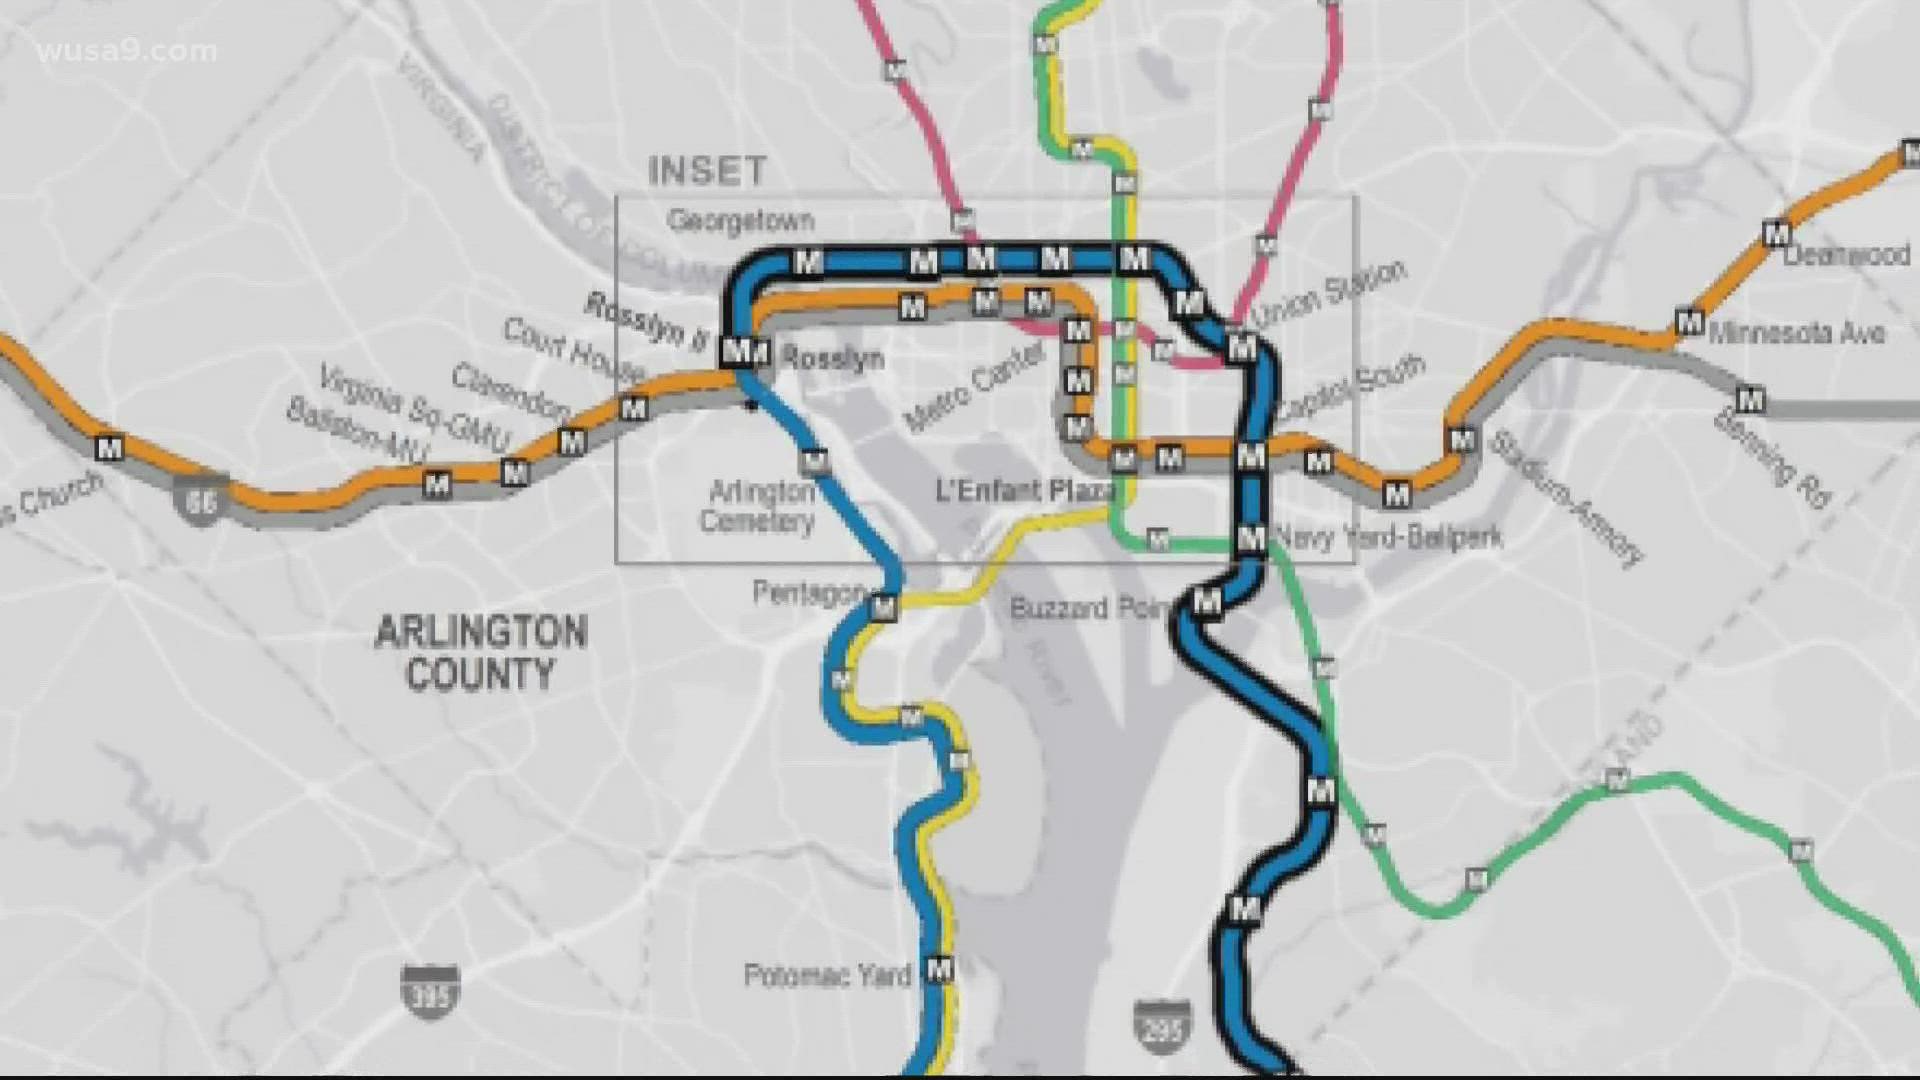 Study suggests adding Georgetown Metro station to address overcrowding.